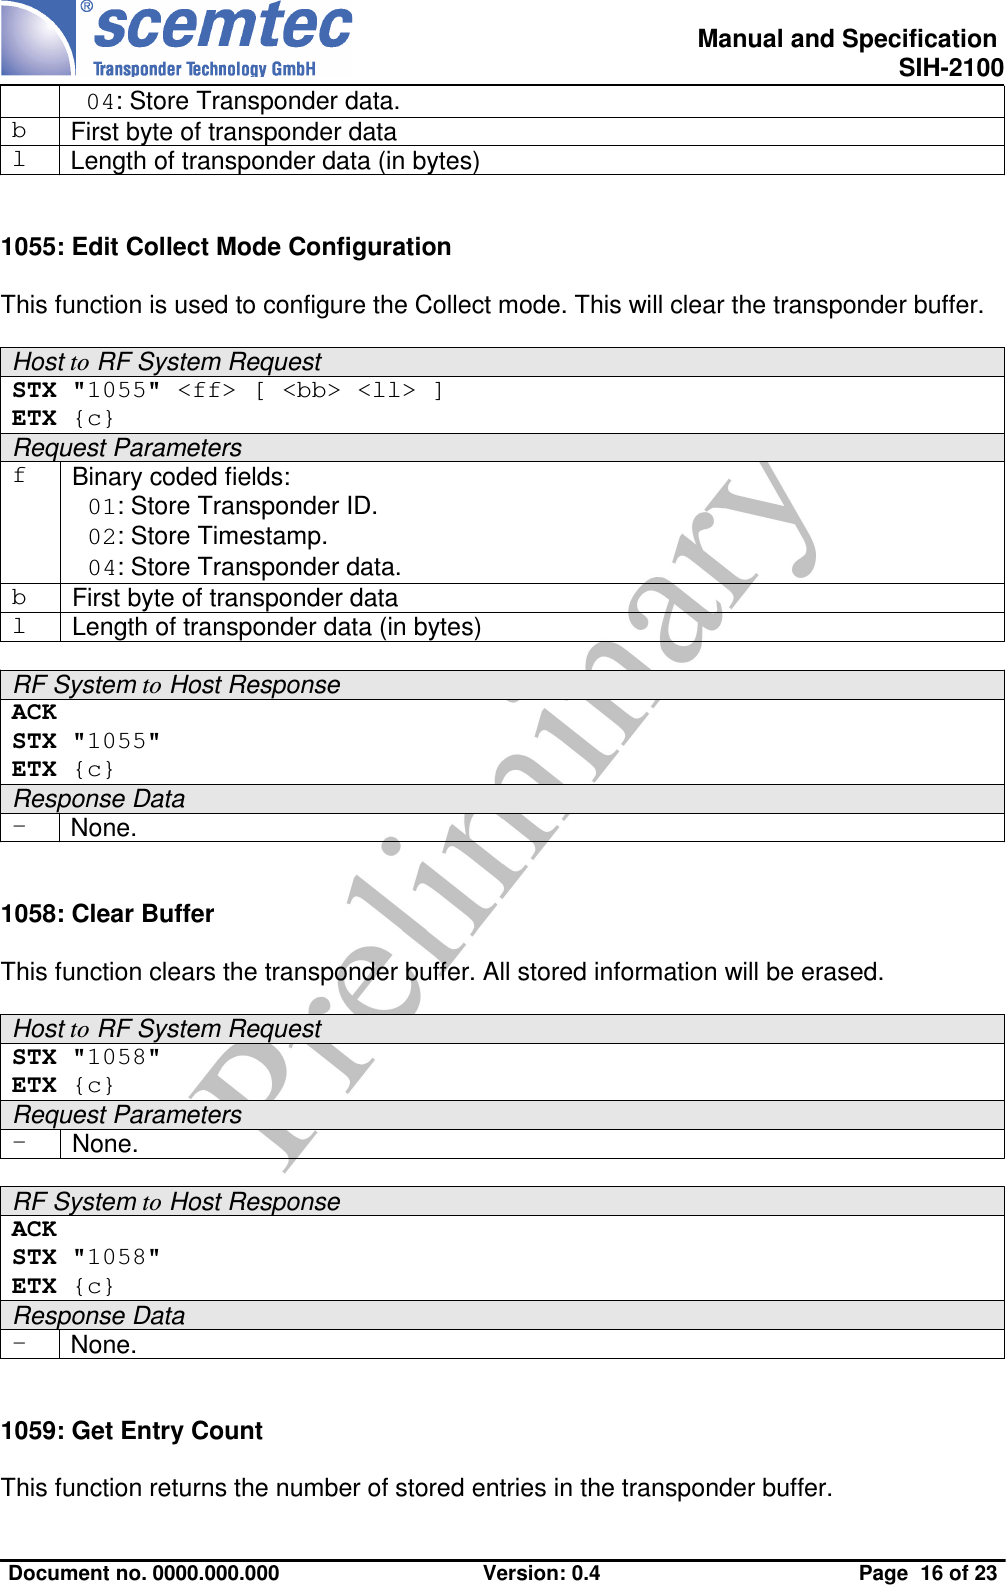  Manual and Specification SIH-2100 04: Store Transponder data.bFirst byte of transponder datalLength of transponder data (in bytes)1055: Edit Collect Mode ConfigurationThis function is used to configure the Collect mode. This will clear the transponder buffer.Host to RF System RequestSTX &quot;1055&quot; &lt;ff&gt; [ &lt;bb&gt; &lt;ll&gt; ] ETX {c}Request ParametersfBinary coded fields: 01: Store Transponder ID. 02: Store Timestamp. 04: Store Transponder data.bFirst byte of transponder datalLength of transponder data (in bytes)RF System to Host ResponseACK STX &quot;1055&quot;ETX {c}Response Data-None.1058: Clear BufferThis function clears the transponder buffer. All stored information will be erased.Host to RF System RequestSTX &quot;1058&quot; ETX {c}Request Parameters-None.RF System to Host ResponseACK STX &quot;1058&quot;ETX {c}Response Data-None.1059: Get Entry CountThis function returns the number of stored entries in the transponder buffer.Document no. 0000.000.000 Version: 0.4 Page  16 of 23